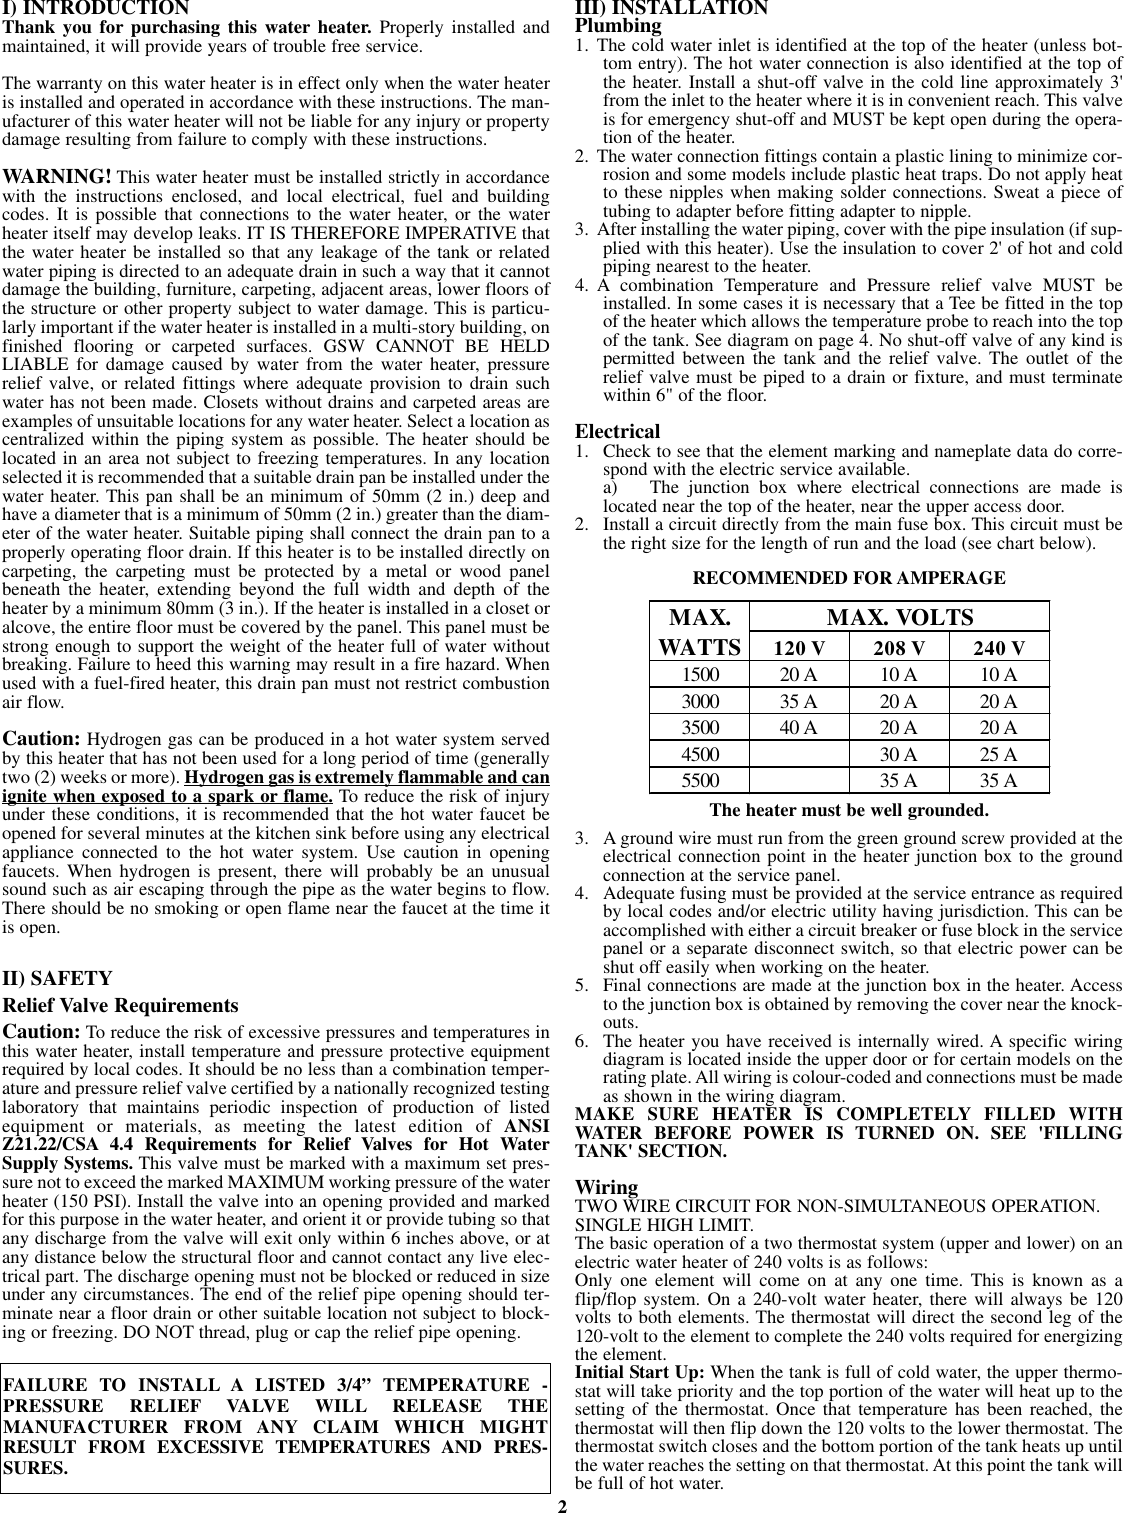 Page 2 of 6 - Gsw Gsw-Electric-Water-Heater-P-N-61515-Rev-G-05-03-Users-Manual-  Gsw-electric-water-heater-p-n-61515-rev-g-05-03-users-manual